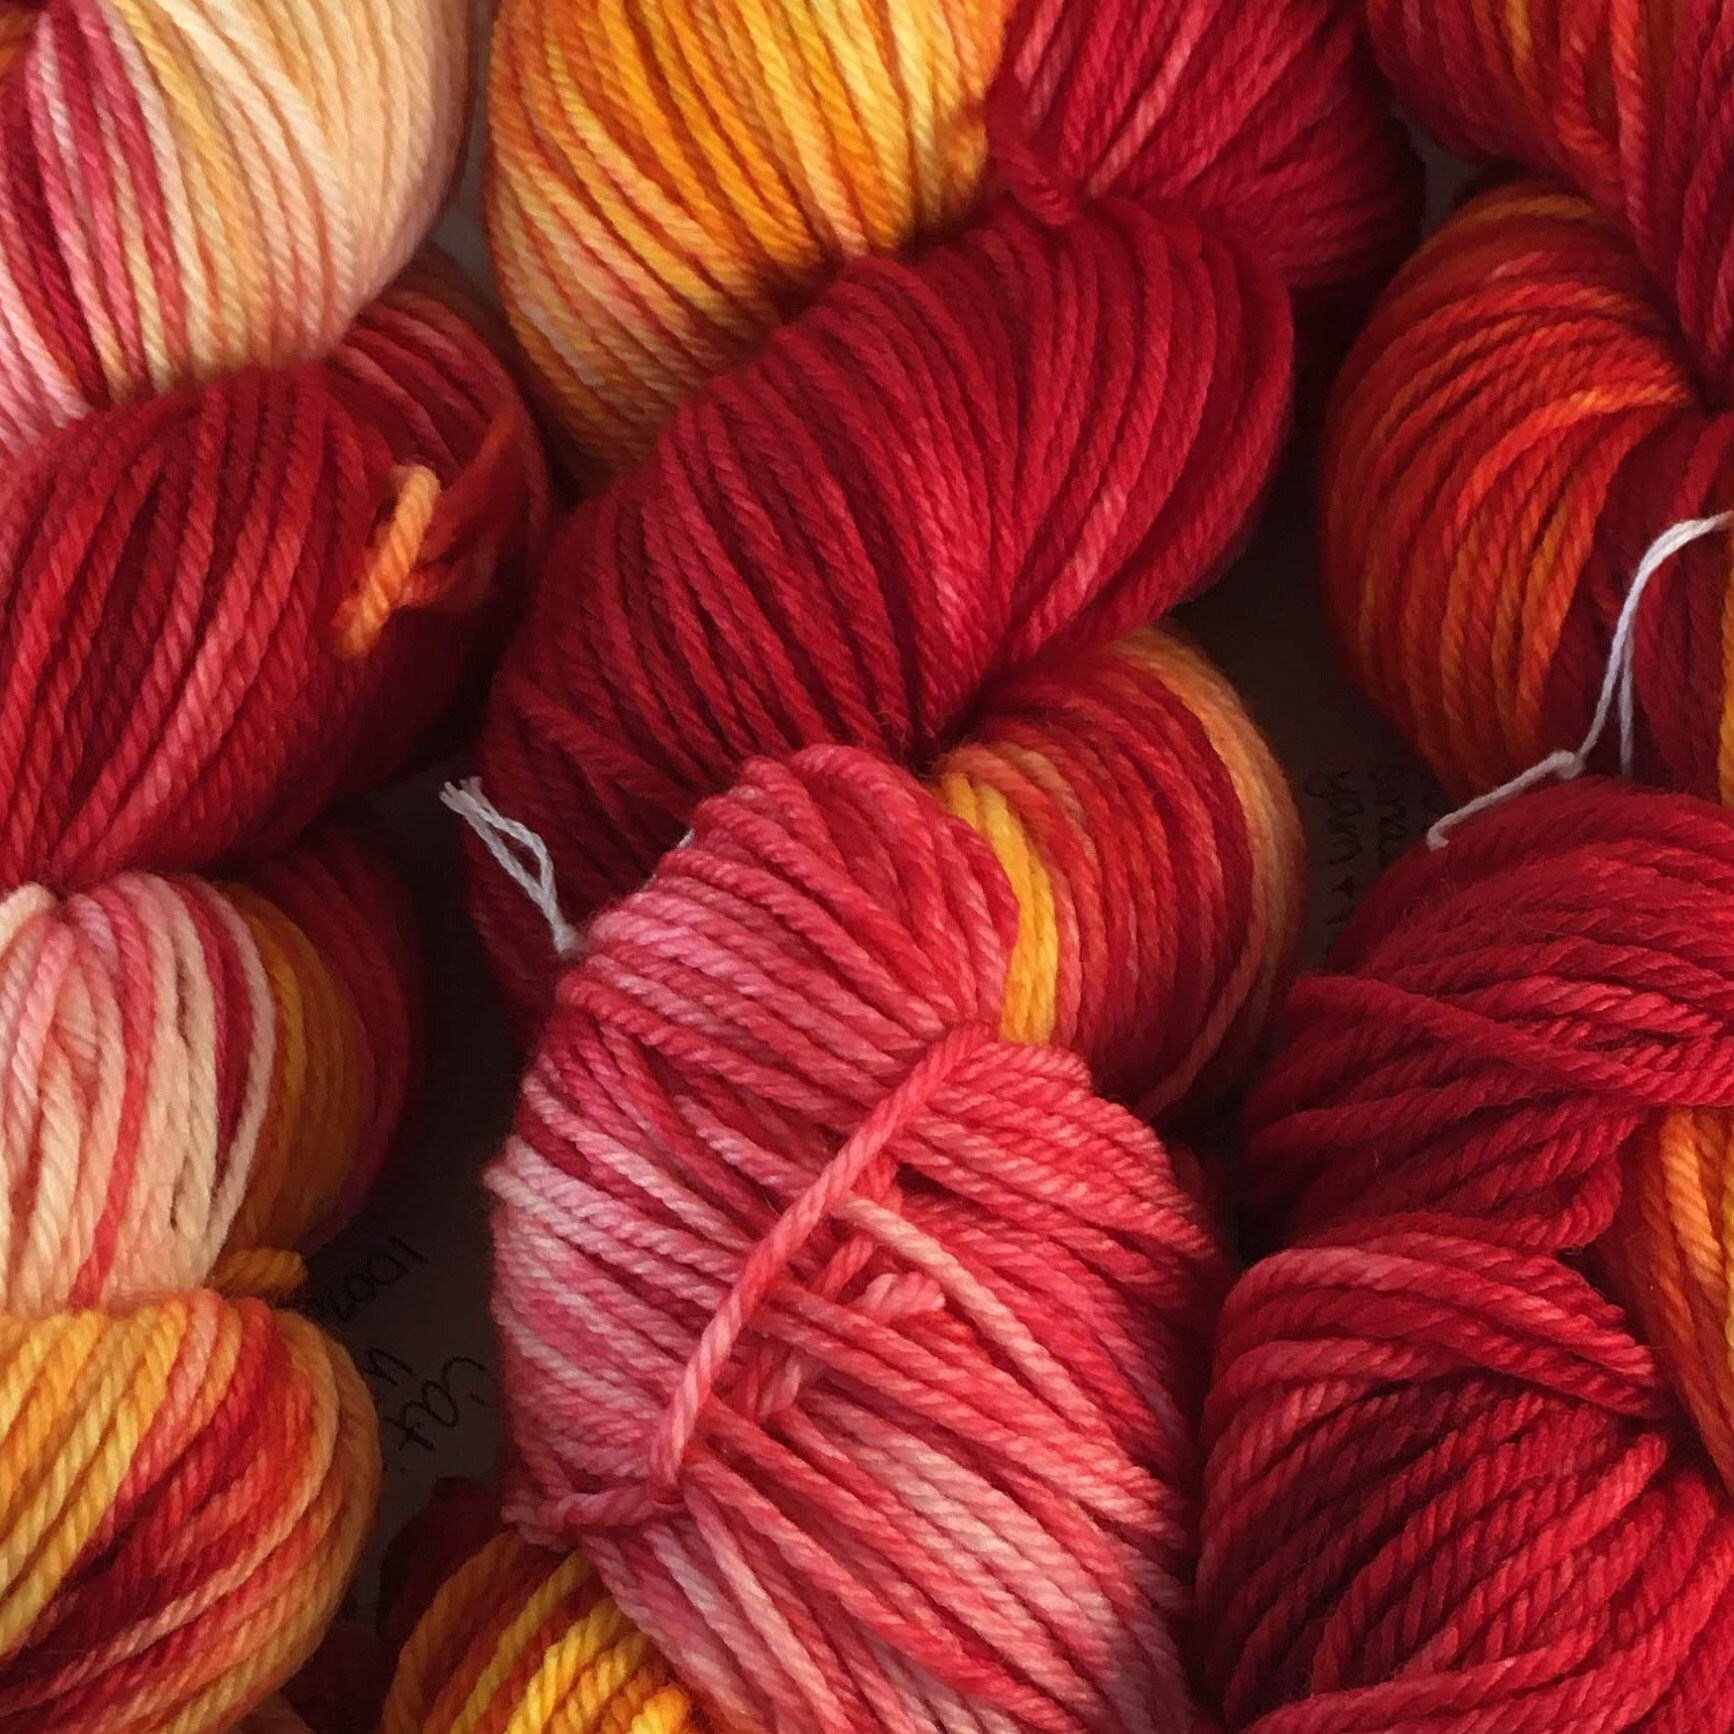 Hypercolor Dreams Worsted Weight Yarn